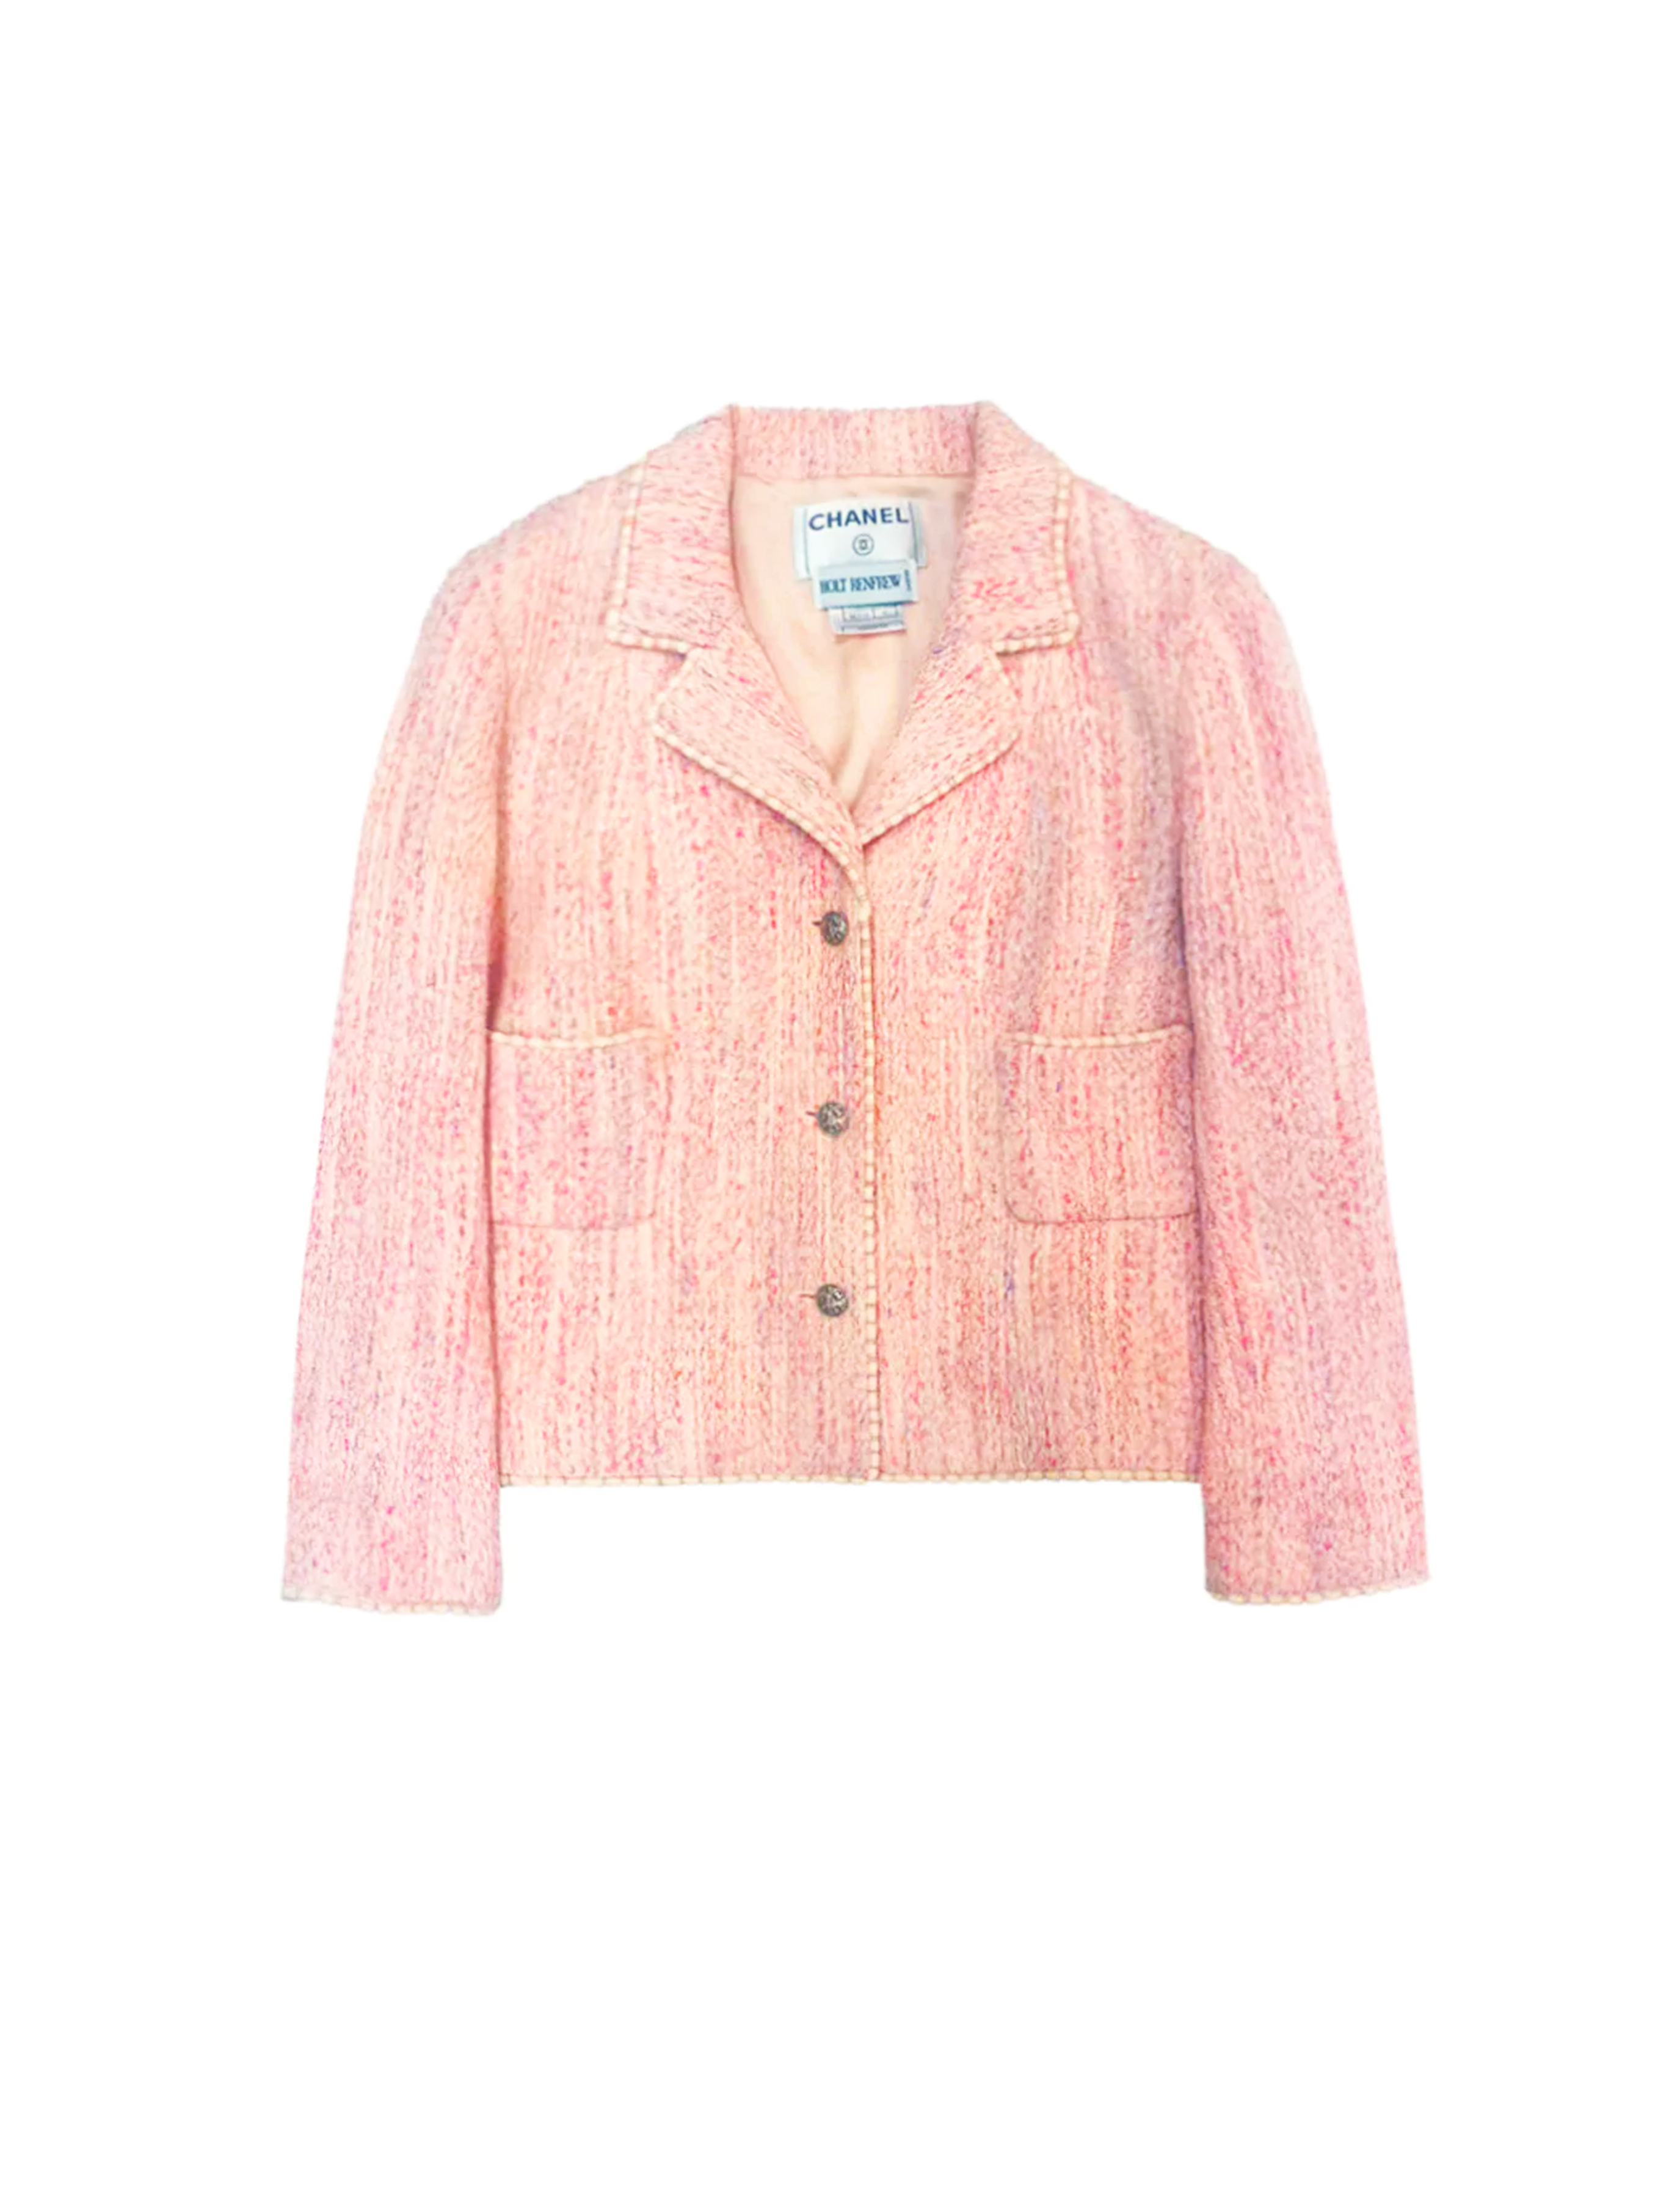 Chanel 2005 Pink Blazer with SIlver Logo Buttons · INTO